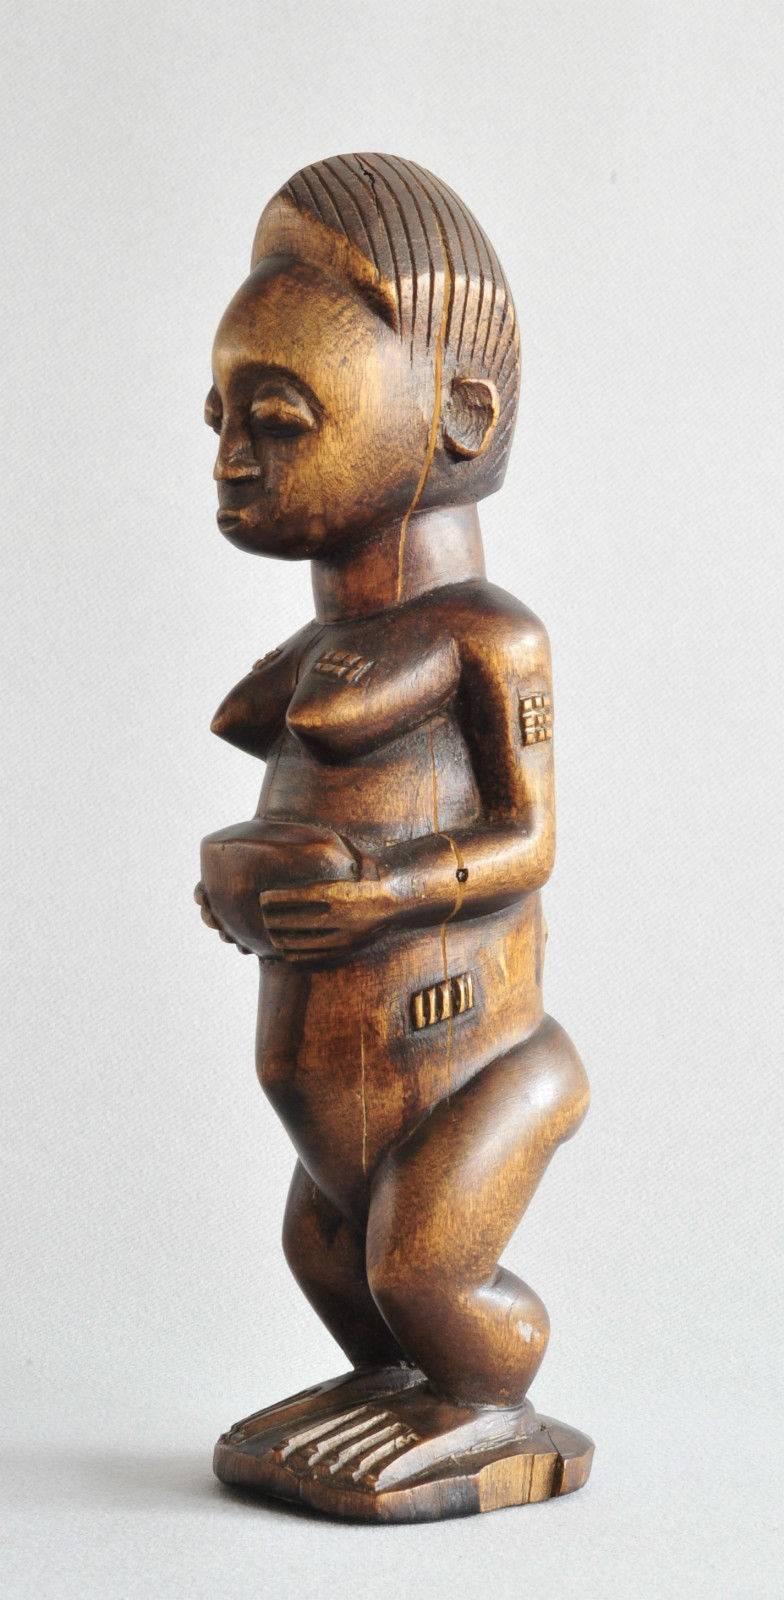 Baoule Sculpture Blolo Bla Ivory Coast, Art Primitive, 1960s In Excellent Condition For Sale In Grenoble, FR